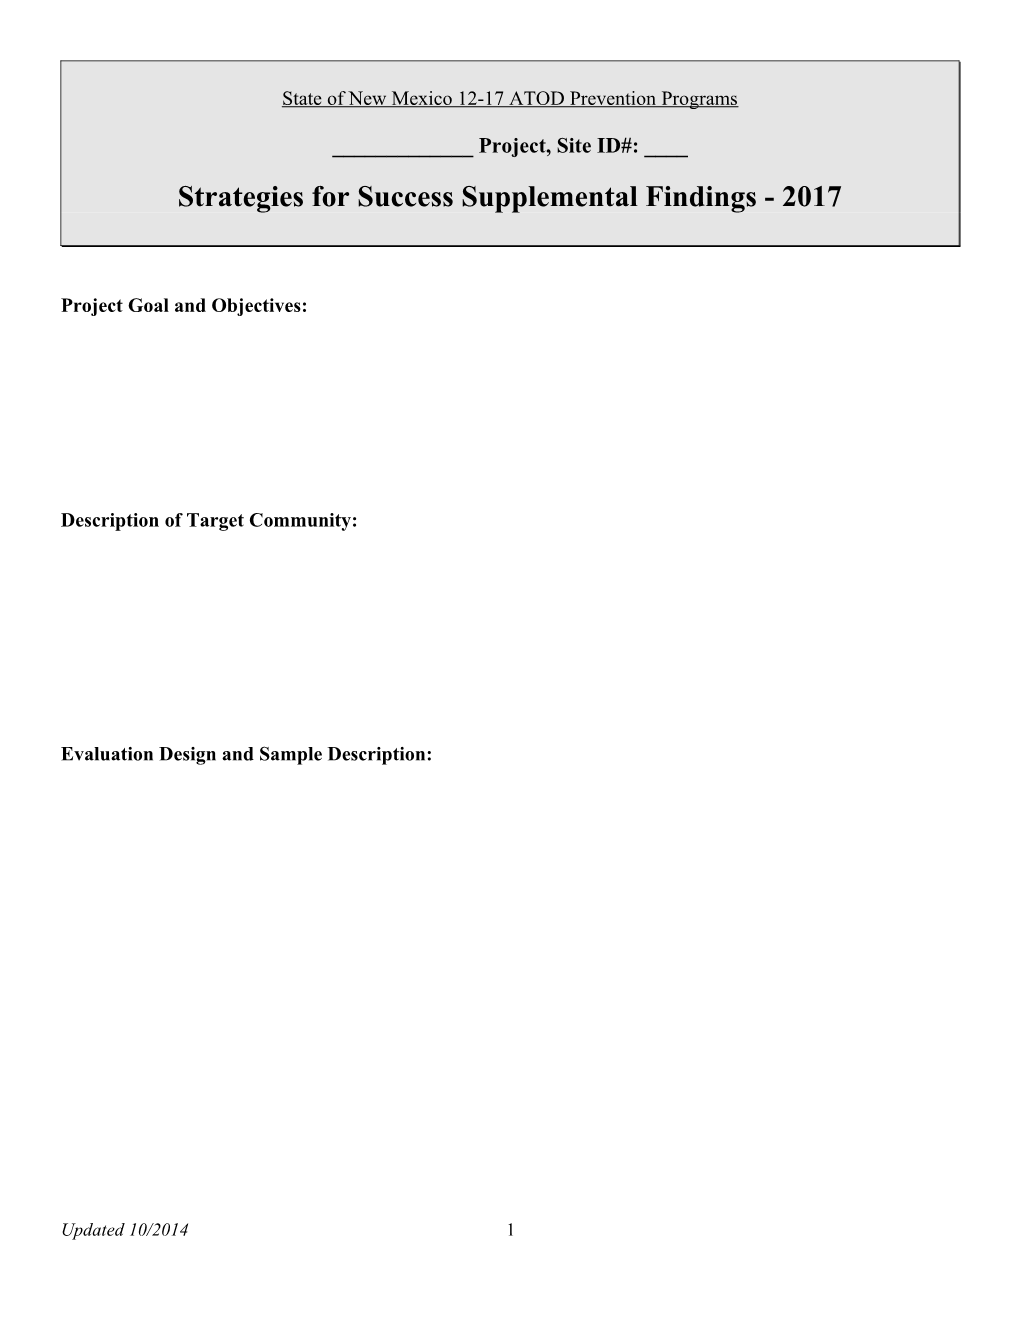 Strategies for Success Supplemental Findings - 2017